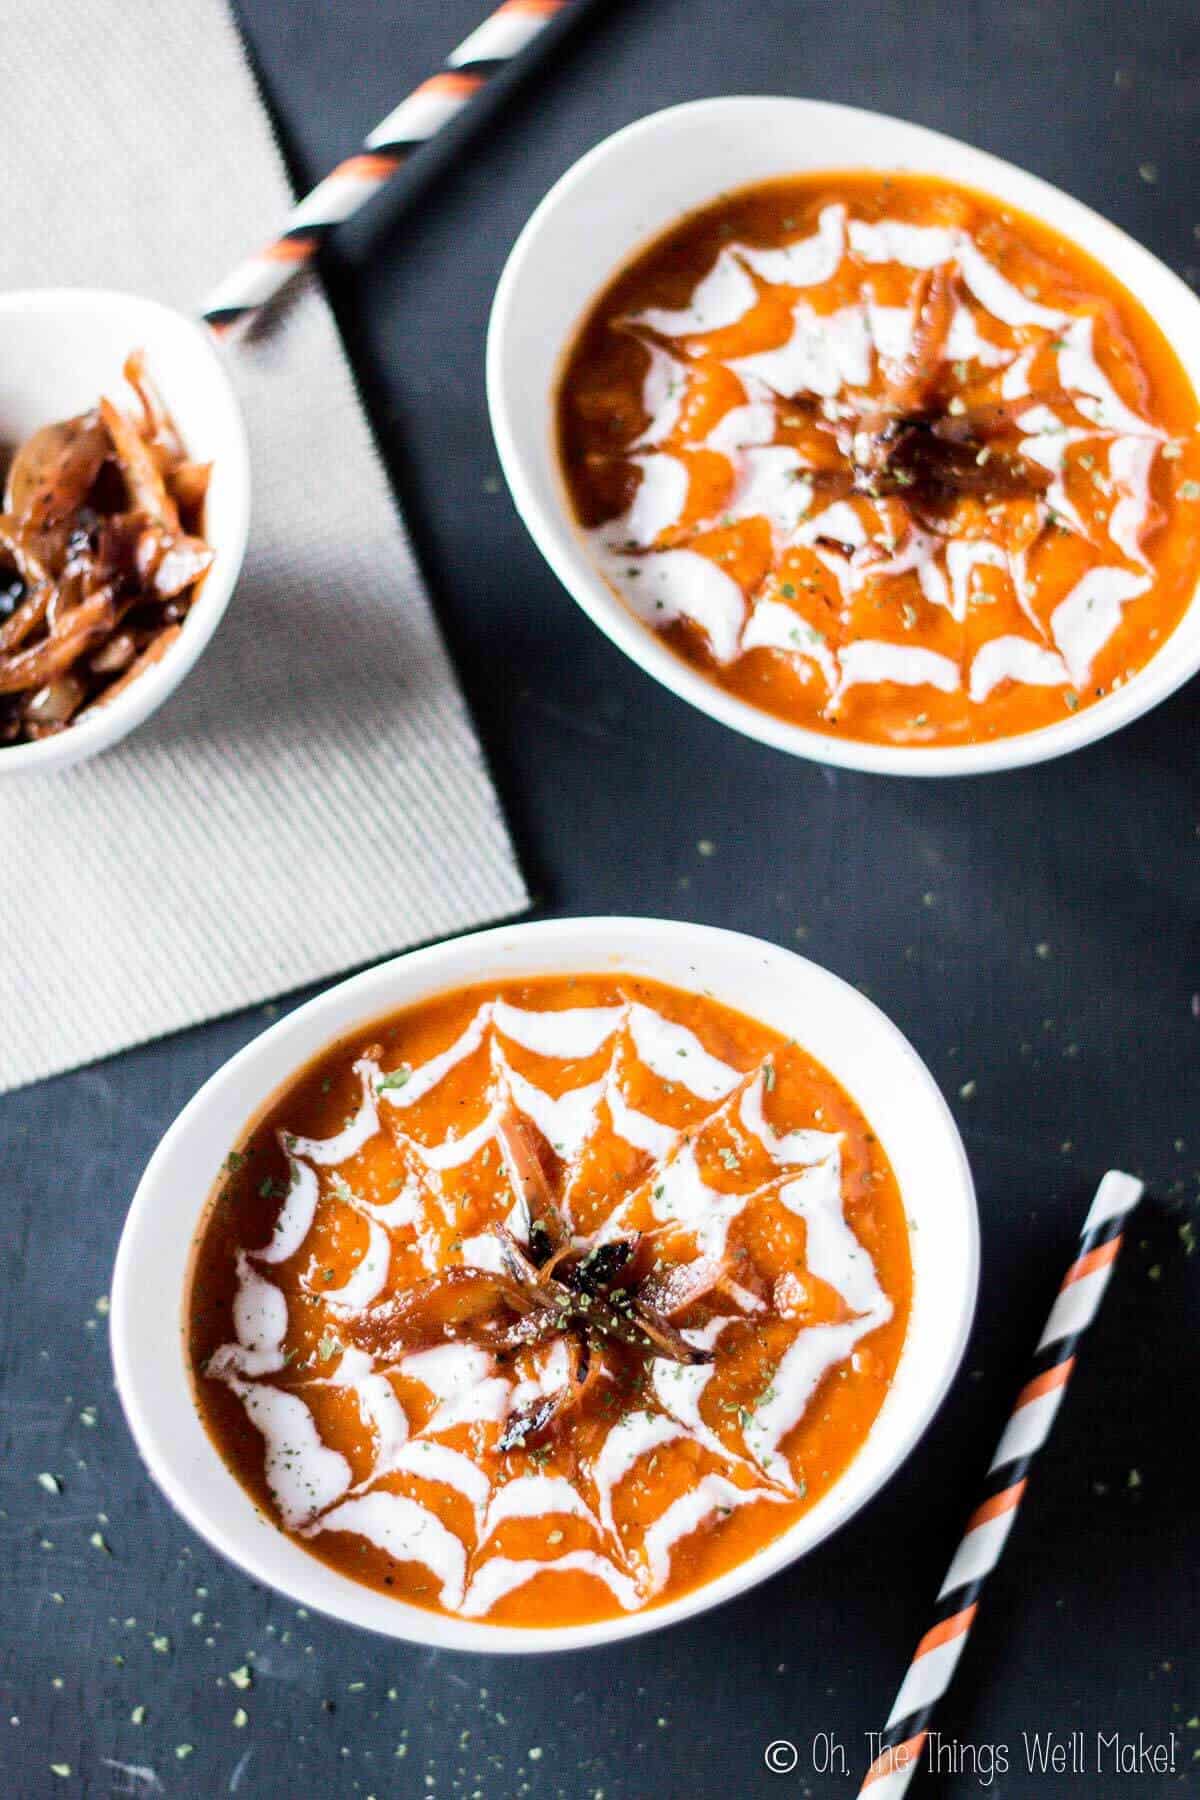 Overhead view of two bowls of a roasted pumpkin and red pepper soup decorated with green yogurt in a spiderweb design. They're garnished with caramelized onions, made to look like spiders on the web..